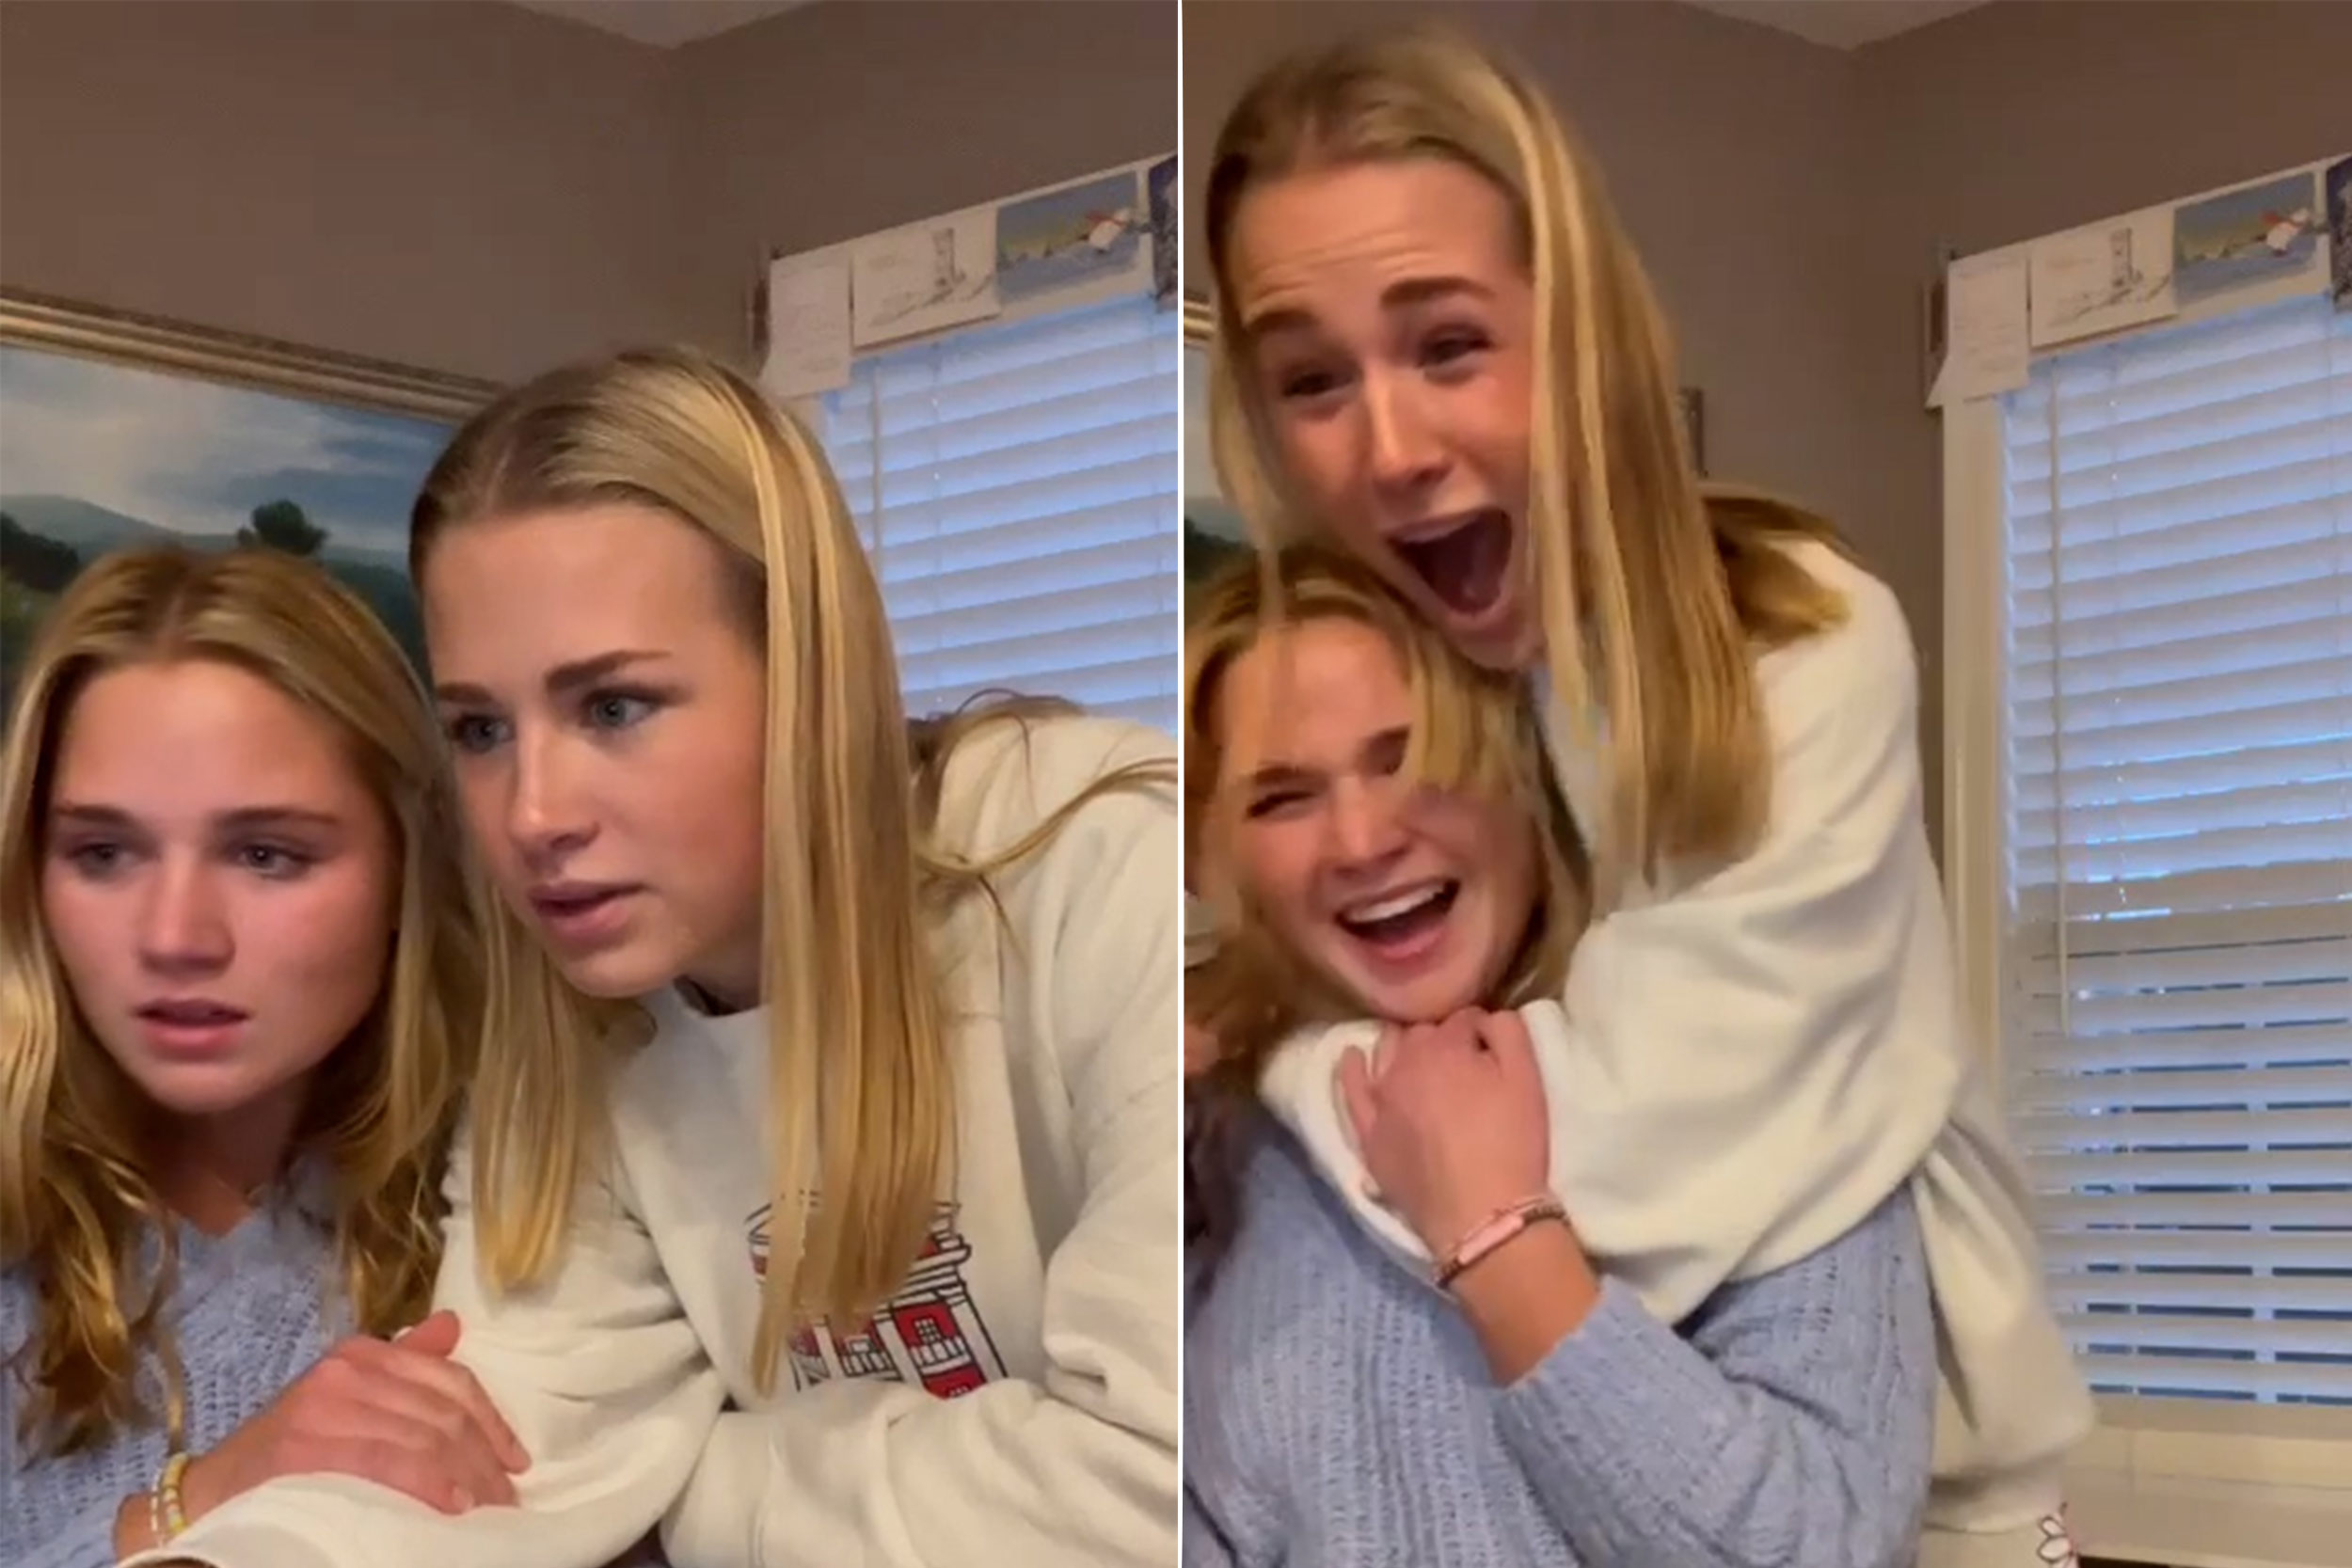 Sisters Sarah Beth Robinson and Anne Charlotte reacting with joy as they find out Sarah beth has been accepted to UVA